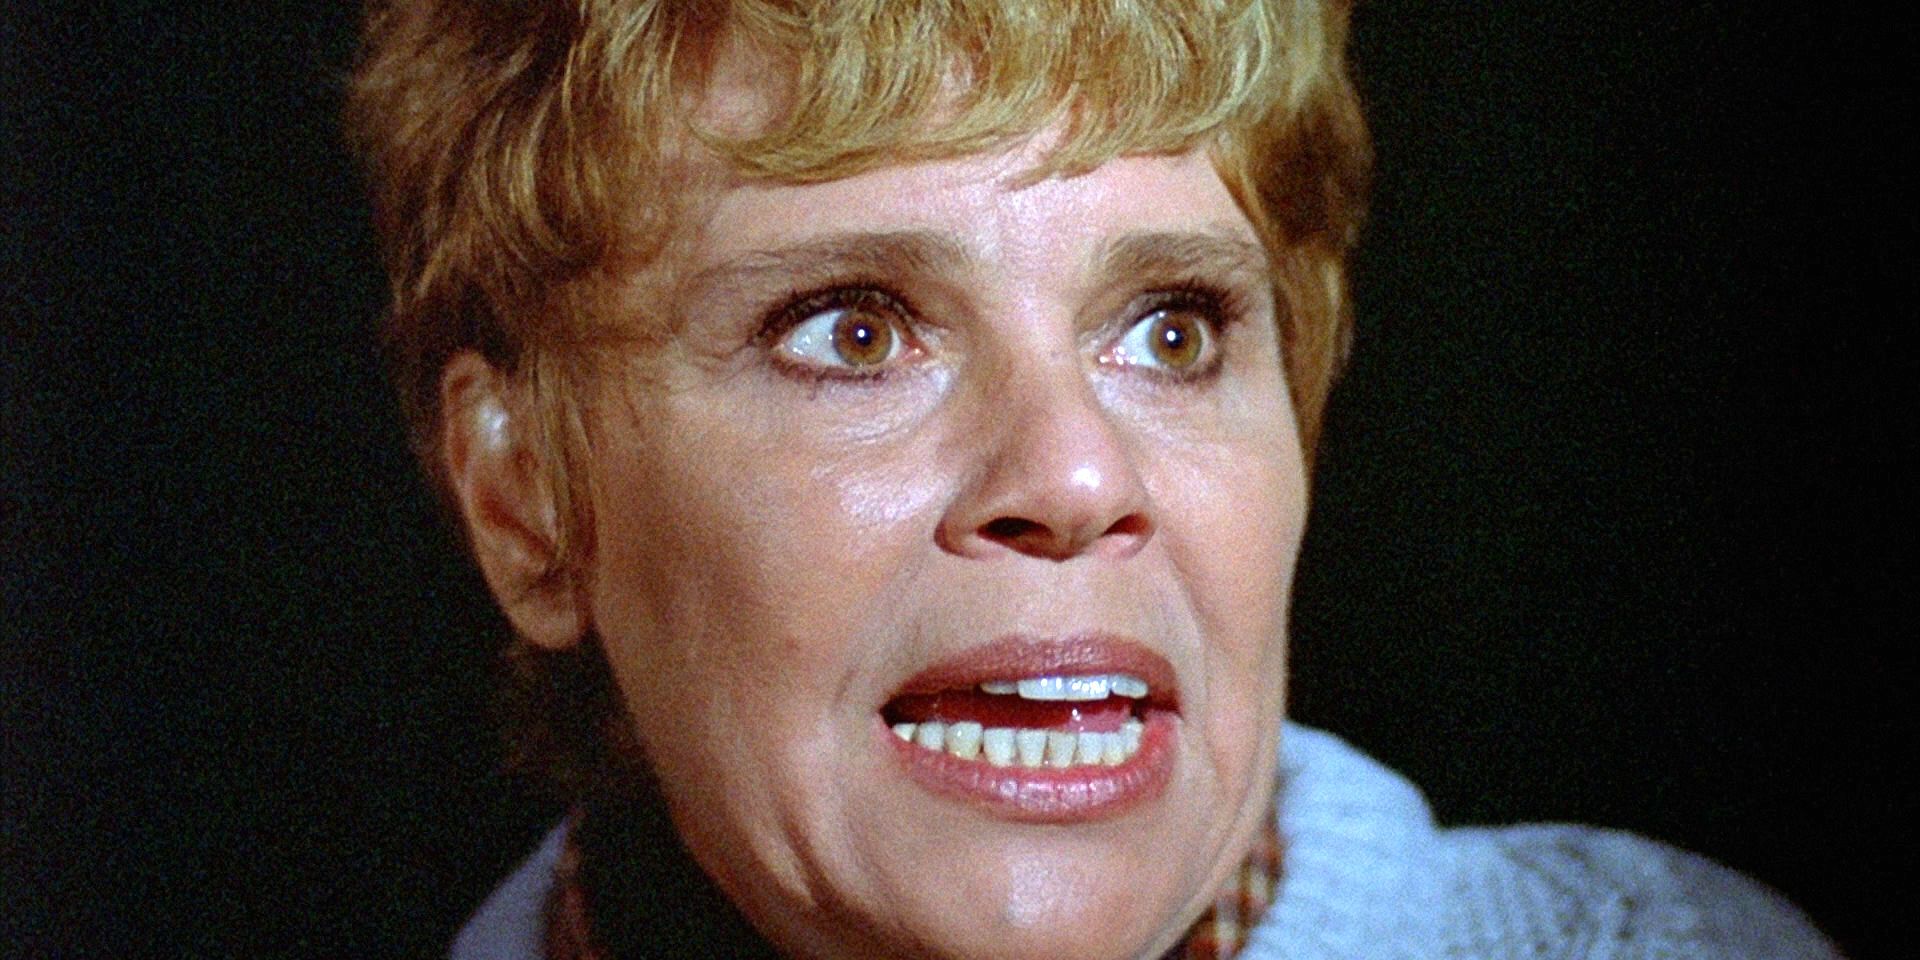 Friday the 13th - Betsy Palmer as Pamela Voorhees